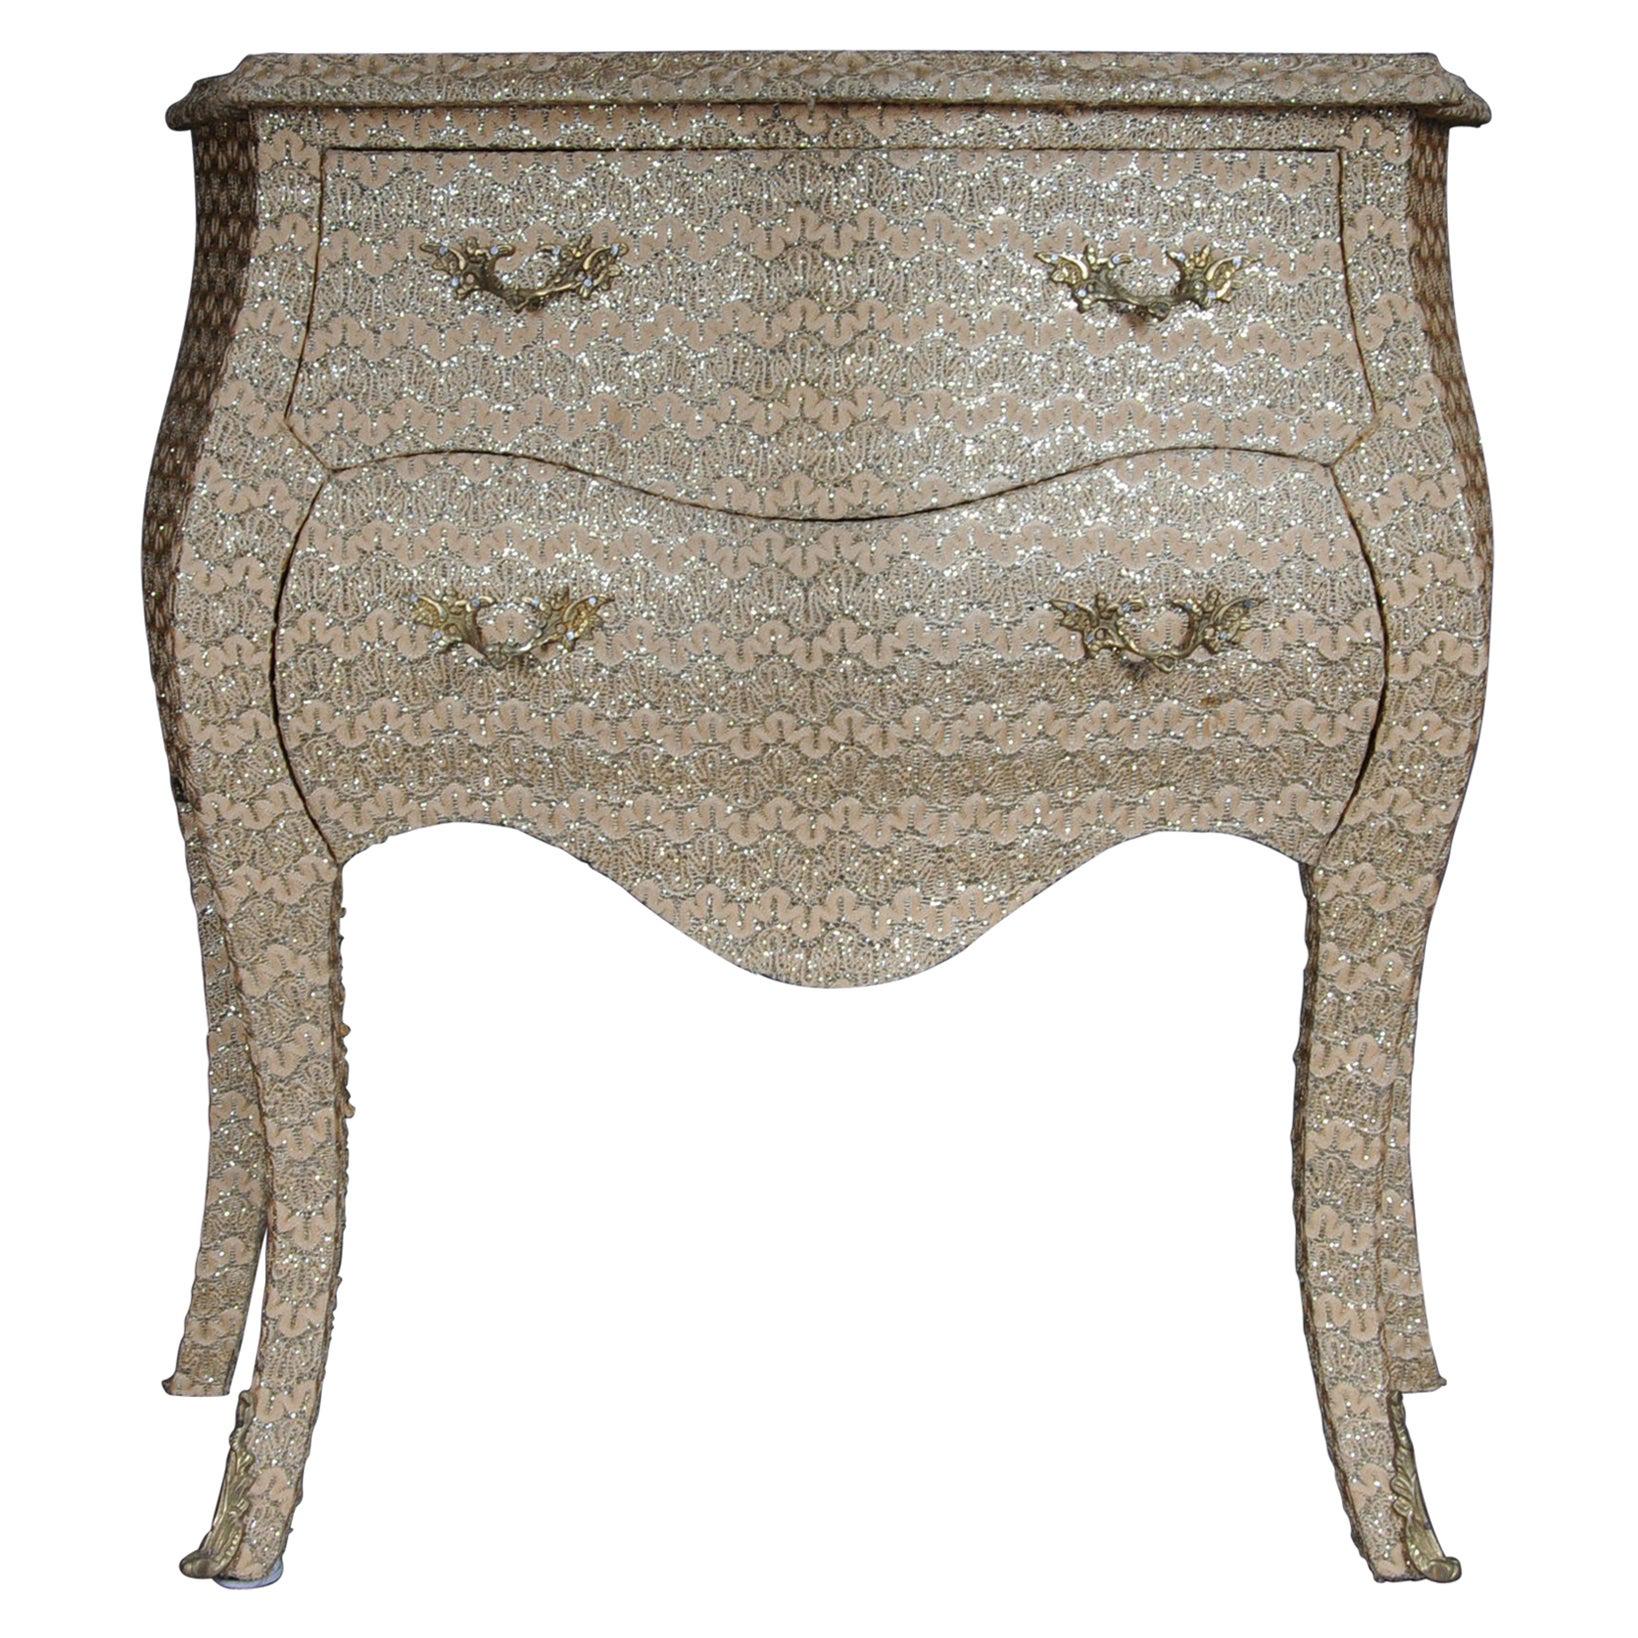 Extravagant Golden Baroque Designer Chest of Drawers with Fabric Cover For Sale